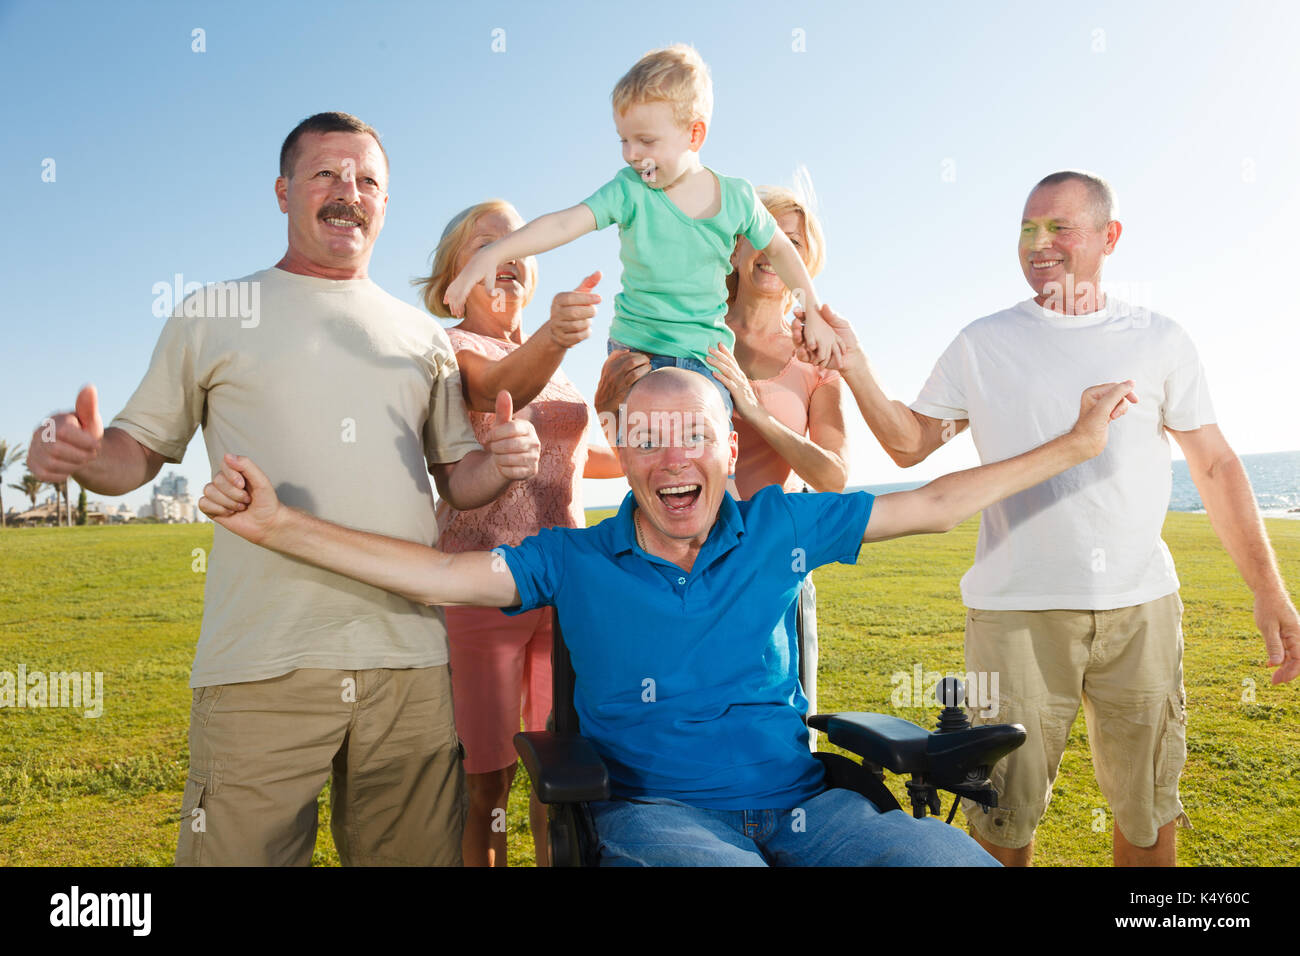 Group of happy people smiling with thumbs up. Stock Photo